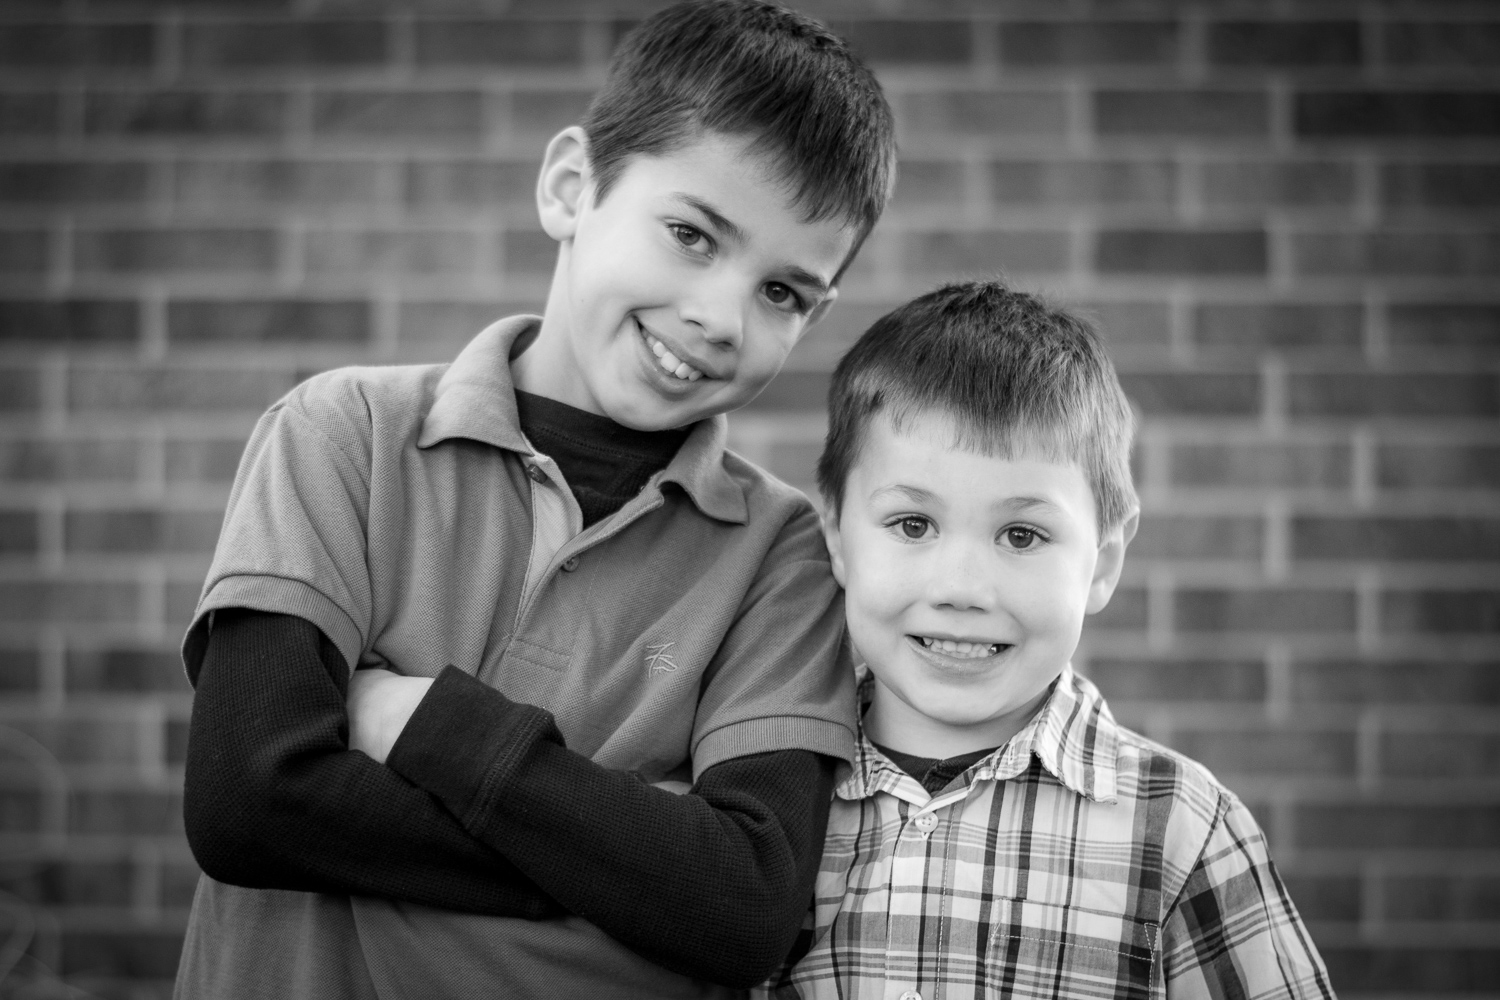 Black and white family photos. Two young boys standing next to each other and looking at the camera while smiling.